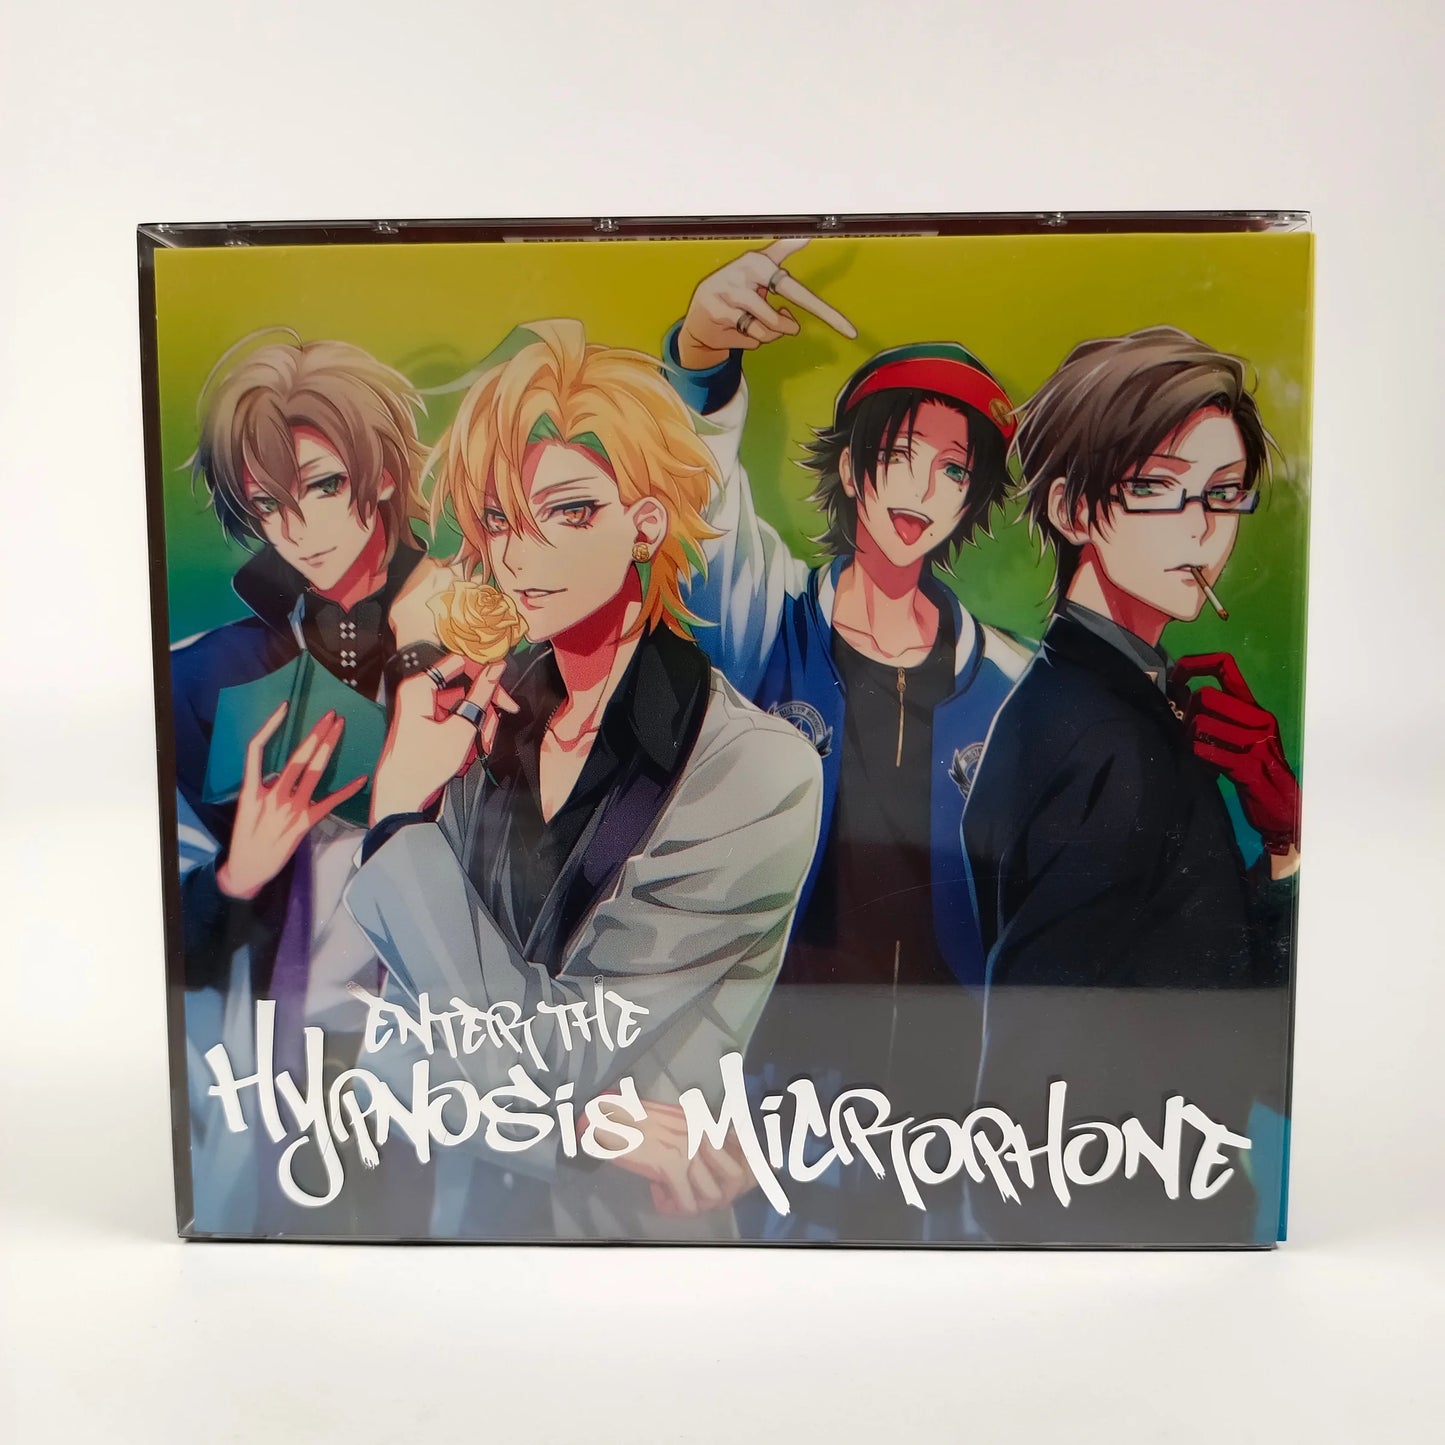 Enter the Hypnosis Microphone